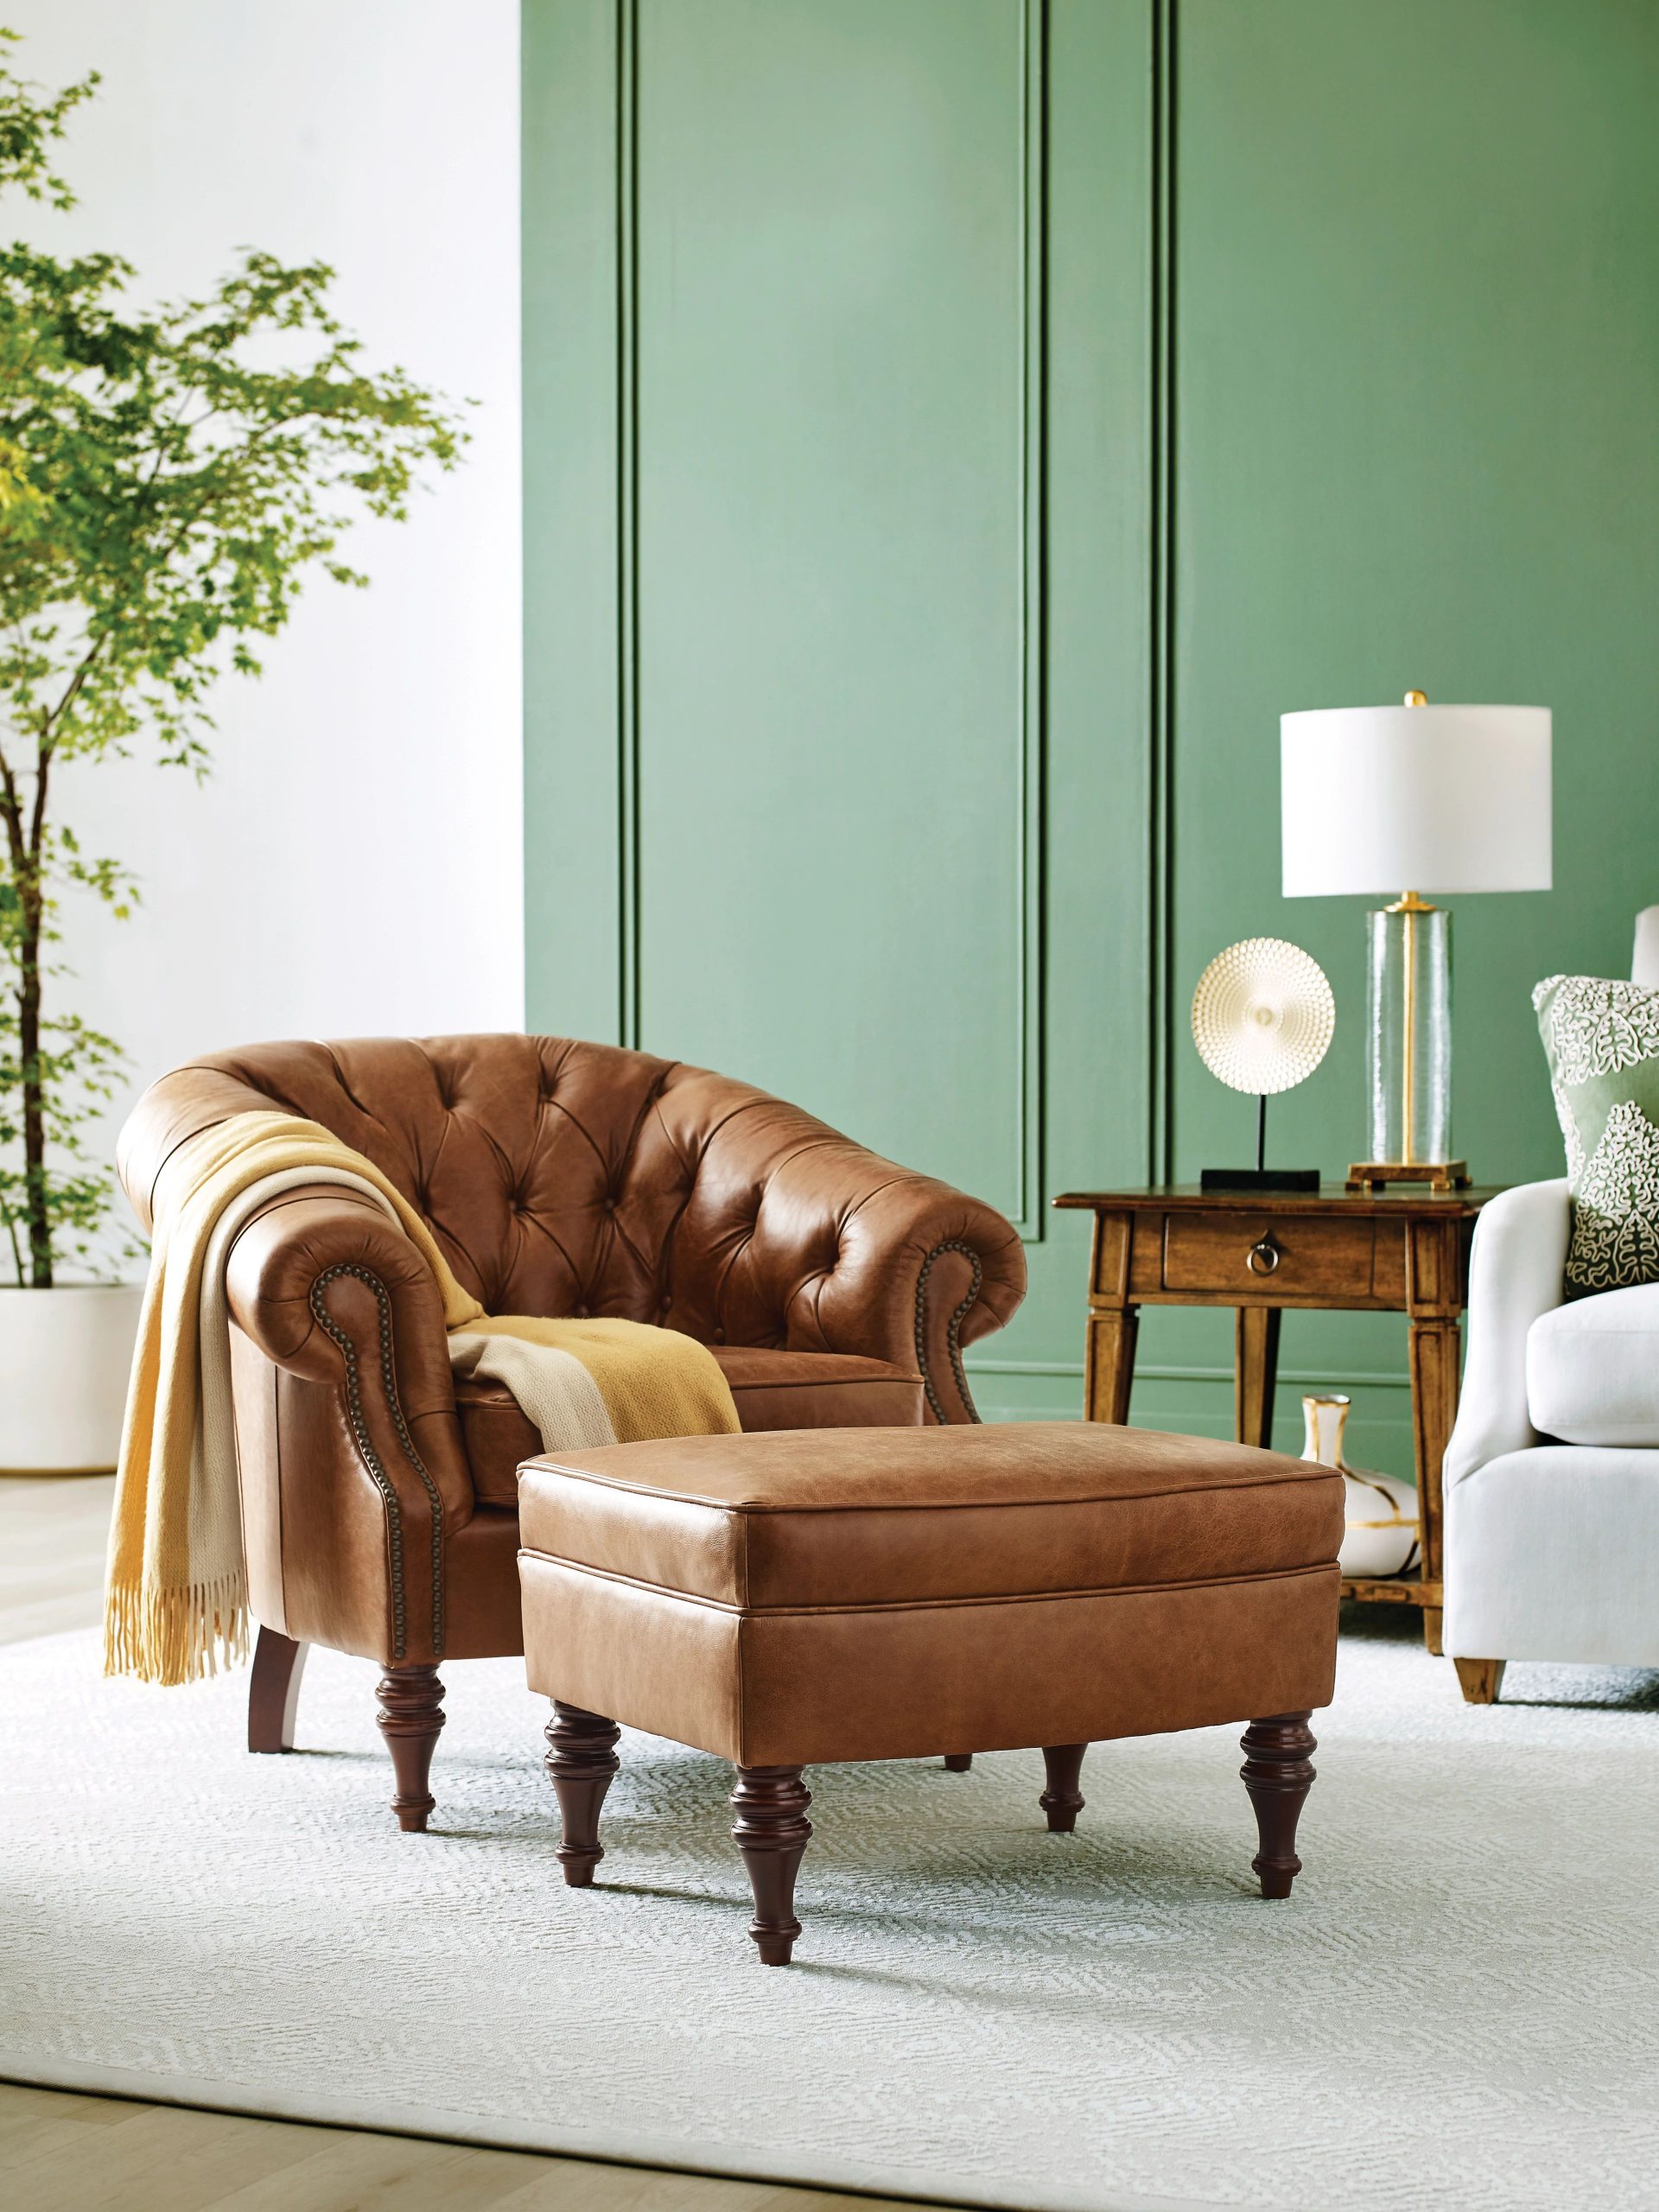 Fall living room decorating ideas from EF Brannon include a Kincaid leather chair.